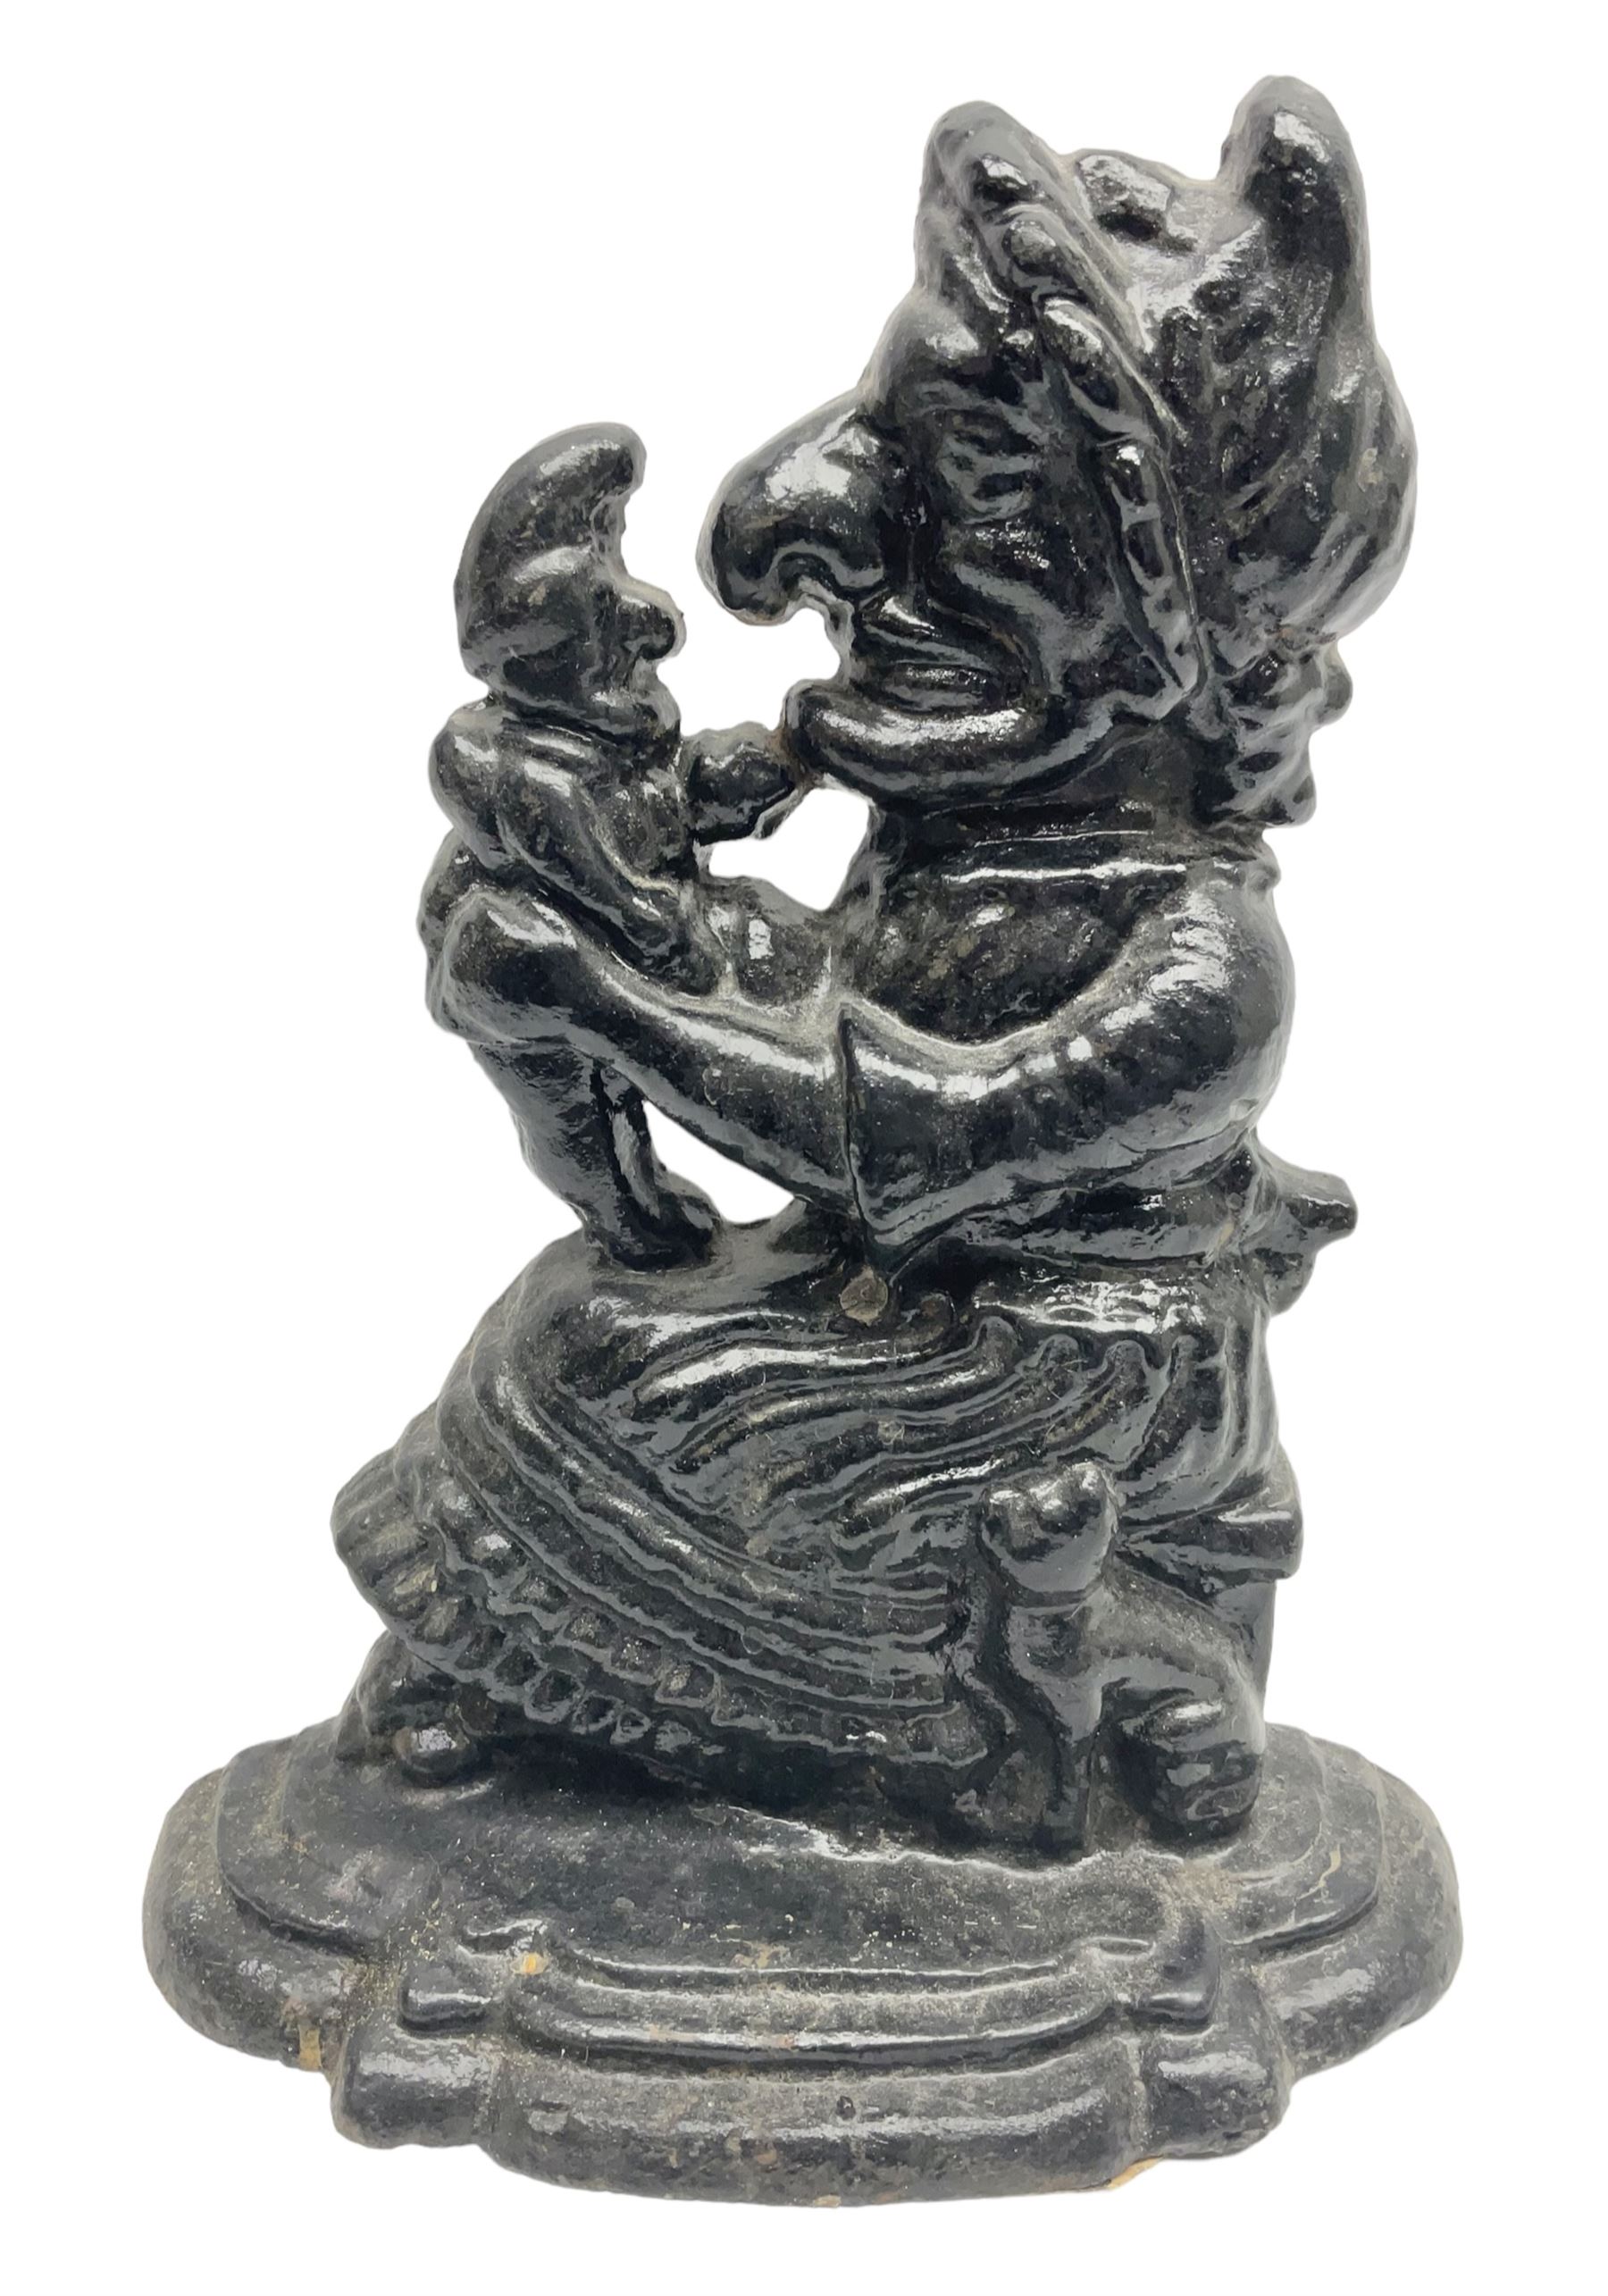 Cast iron moulded doorstop in the form of Punch and Judy